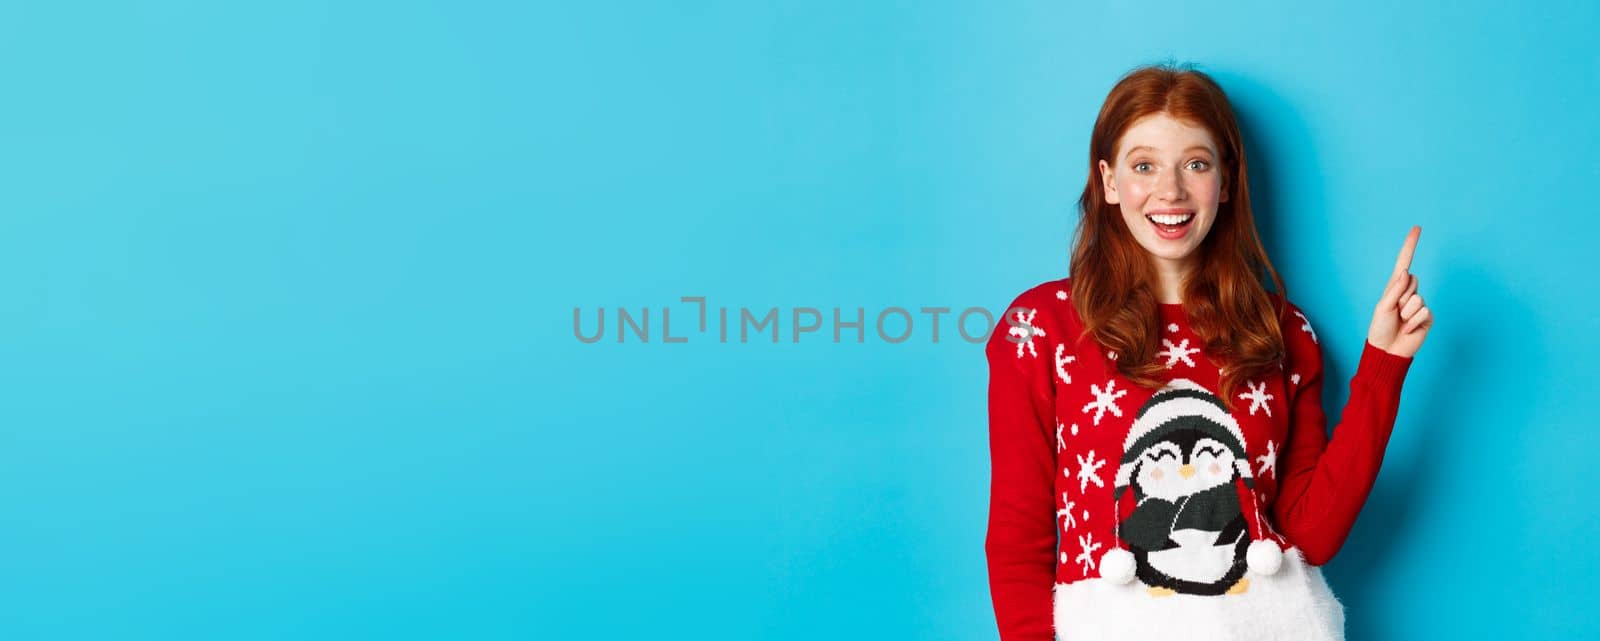 Merry Christmas. Cheerful redhead girl in xmas sweater, pointing finger at upper right corner and smiling excited, showing new year promo.